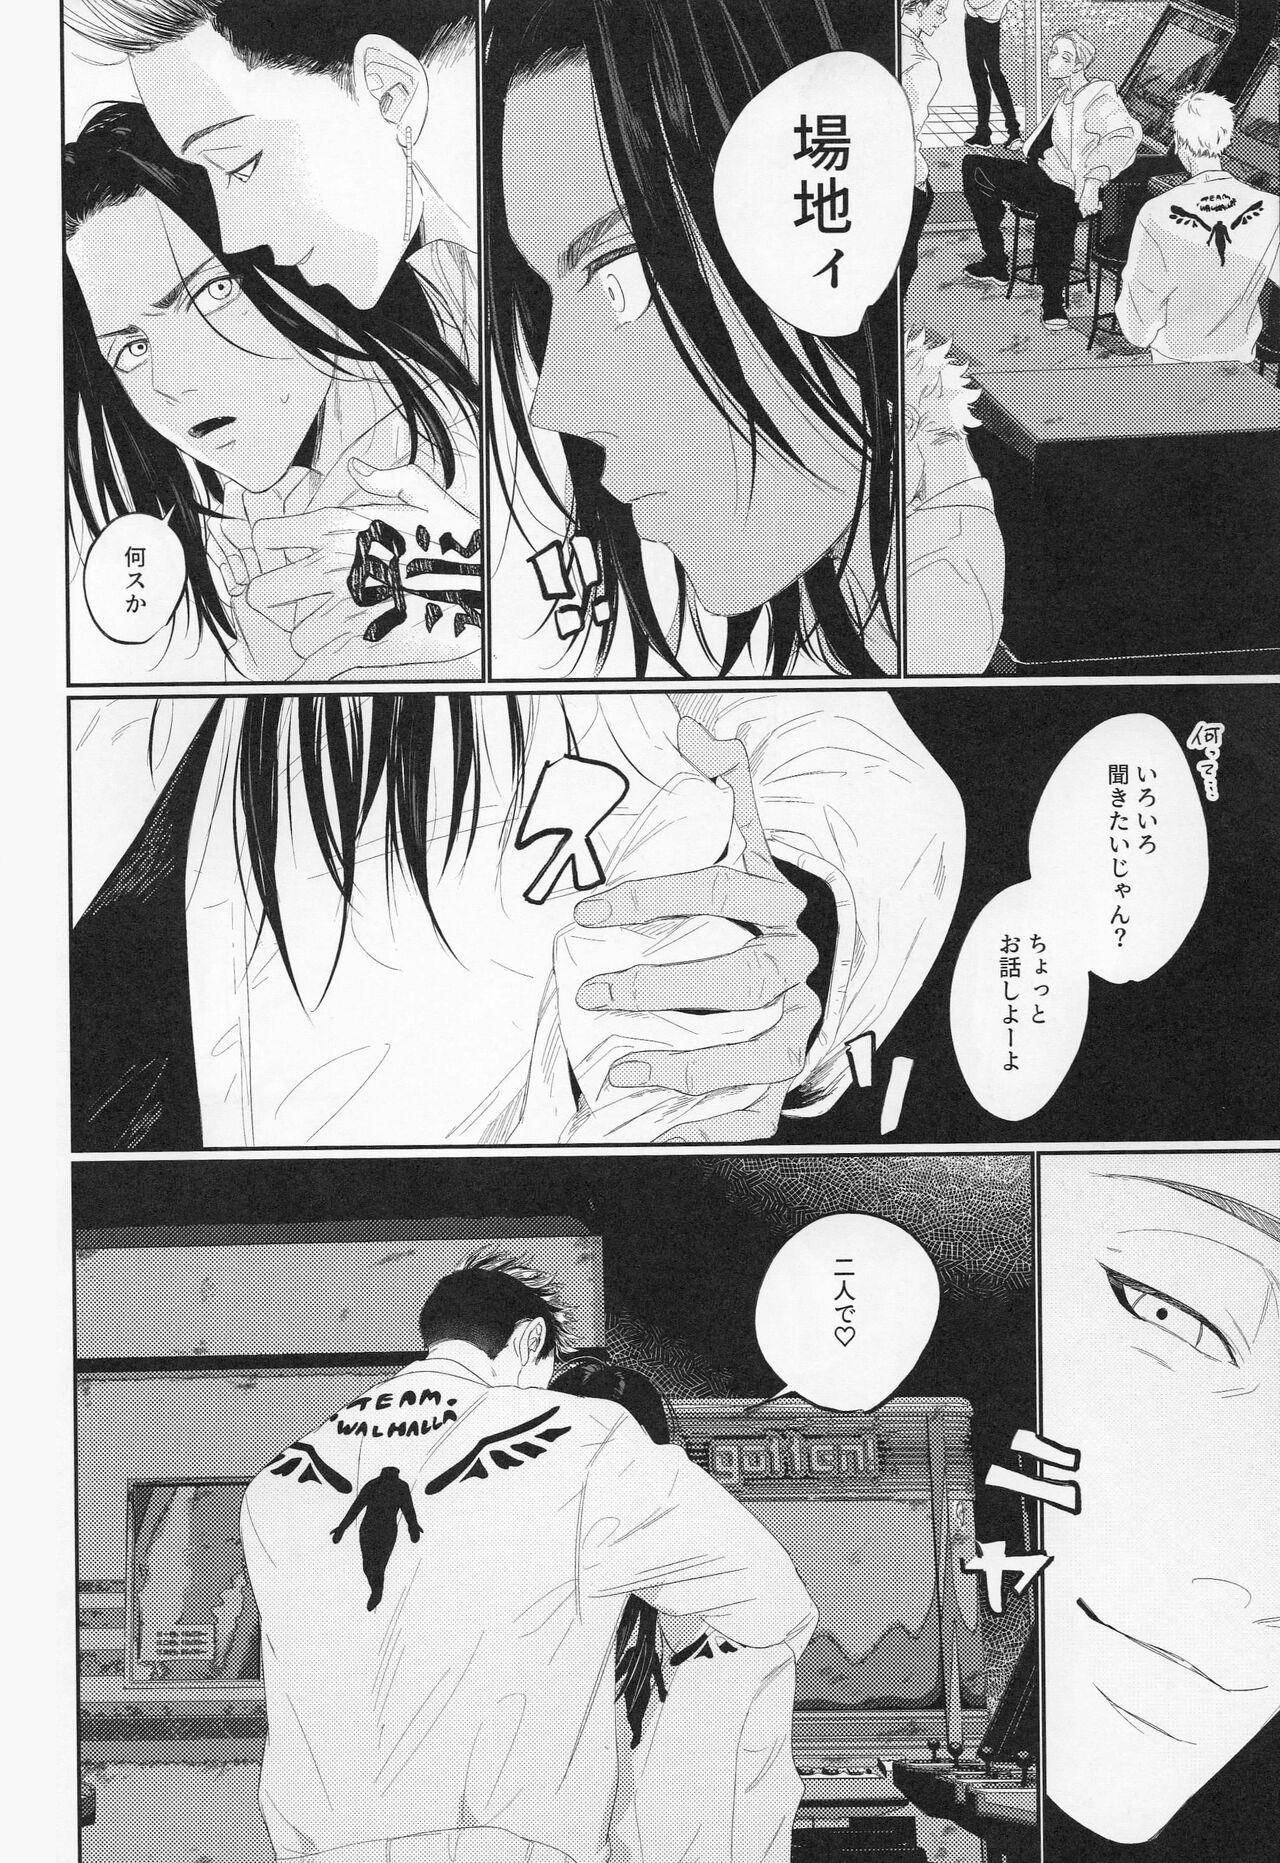 Travesti Valhalla e Youkoso - Welcome to Valhalla - Tokyo revengers Made - Page 5